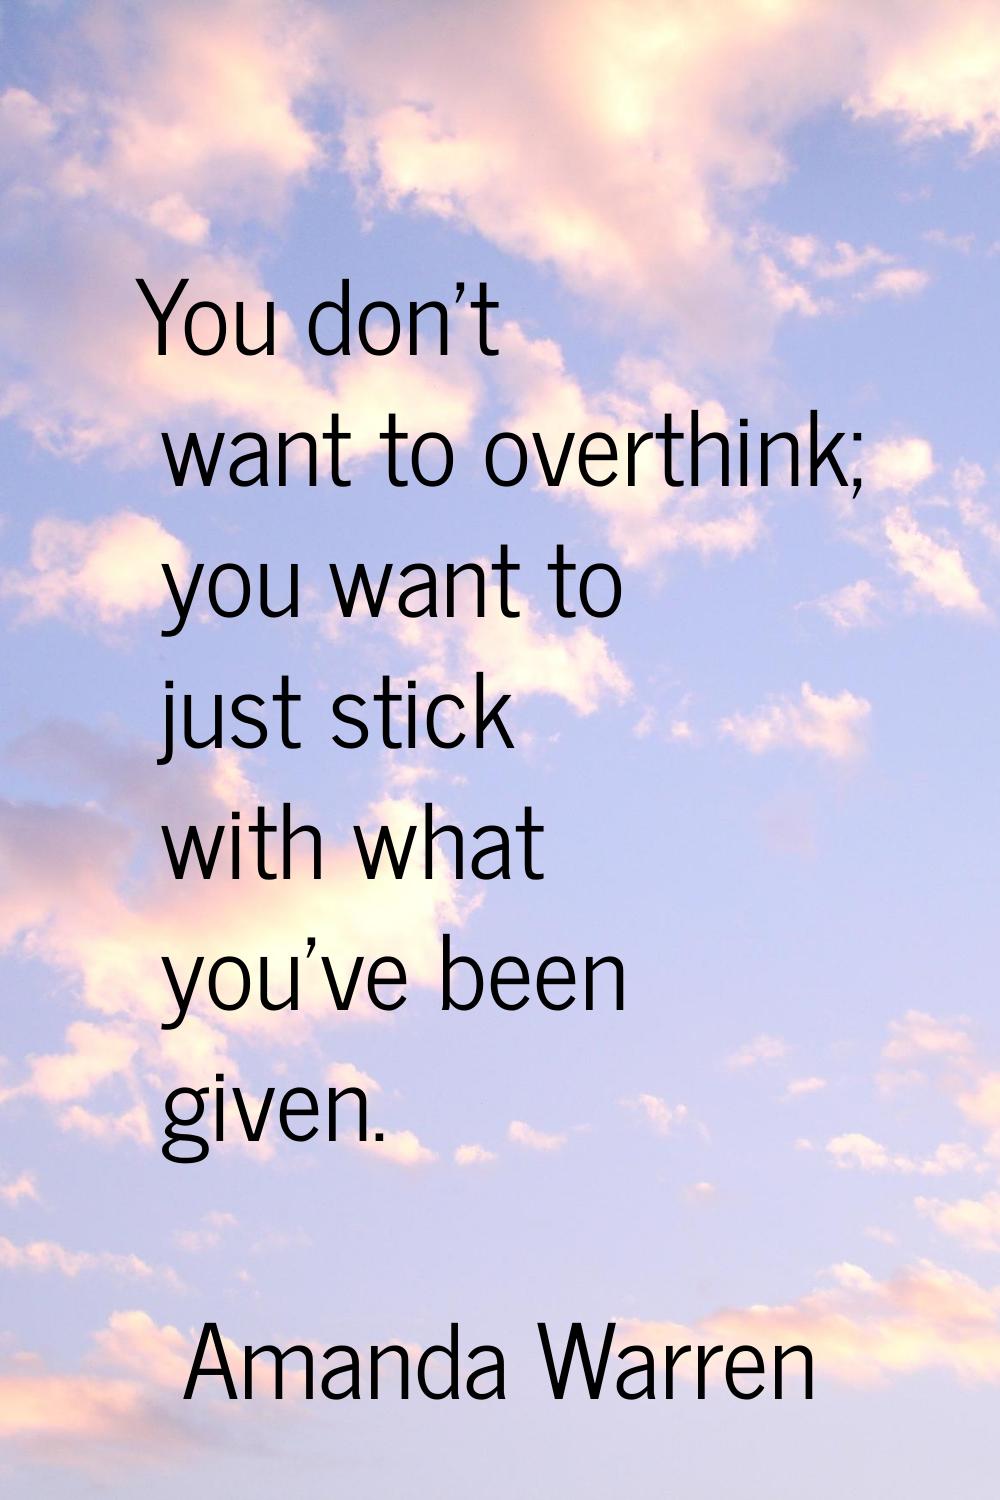 You don't want to overthink; you want to just stick with what you've been given.